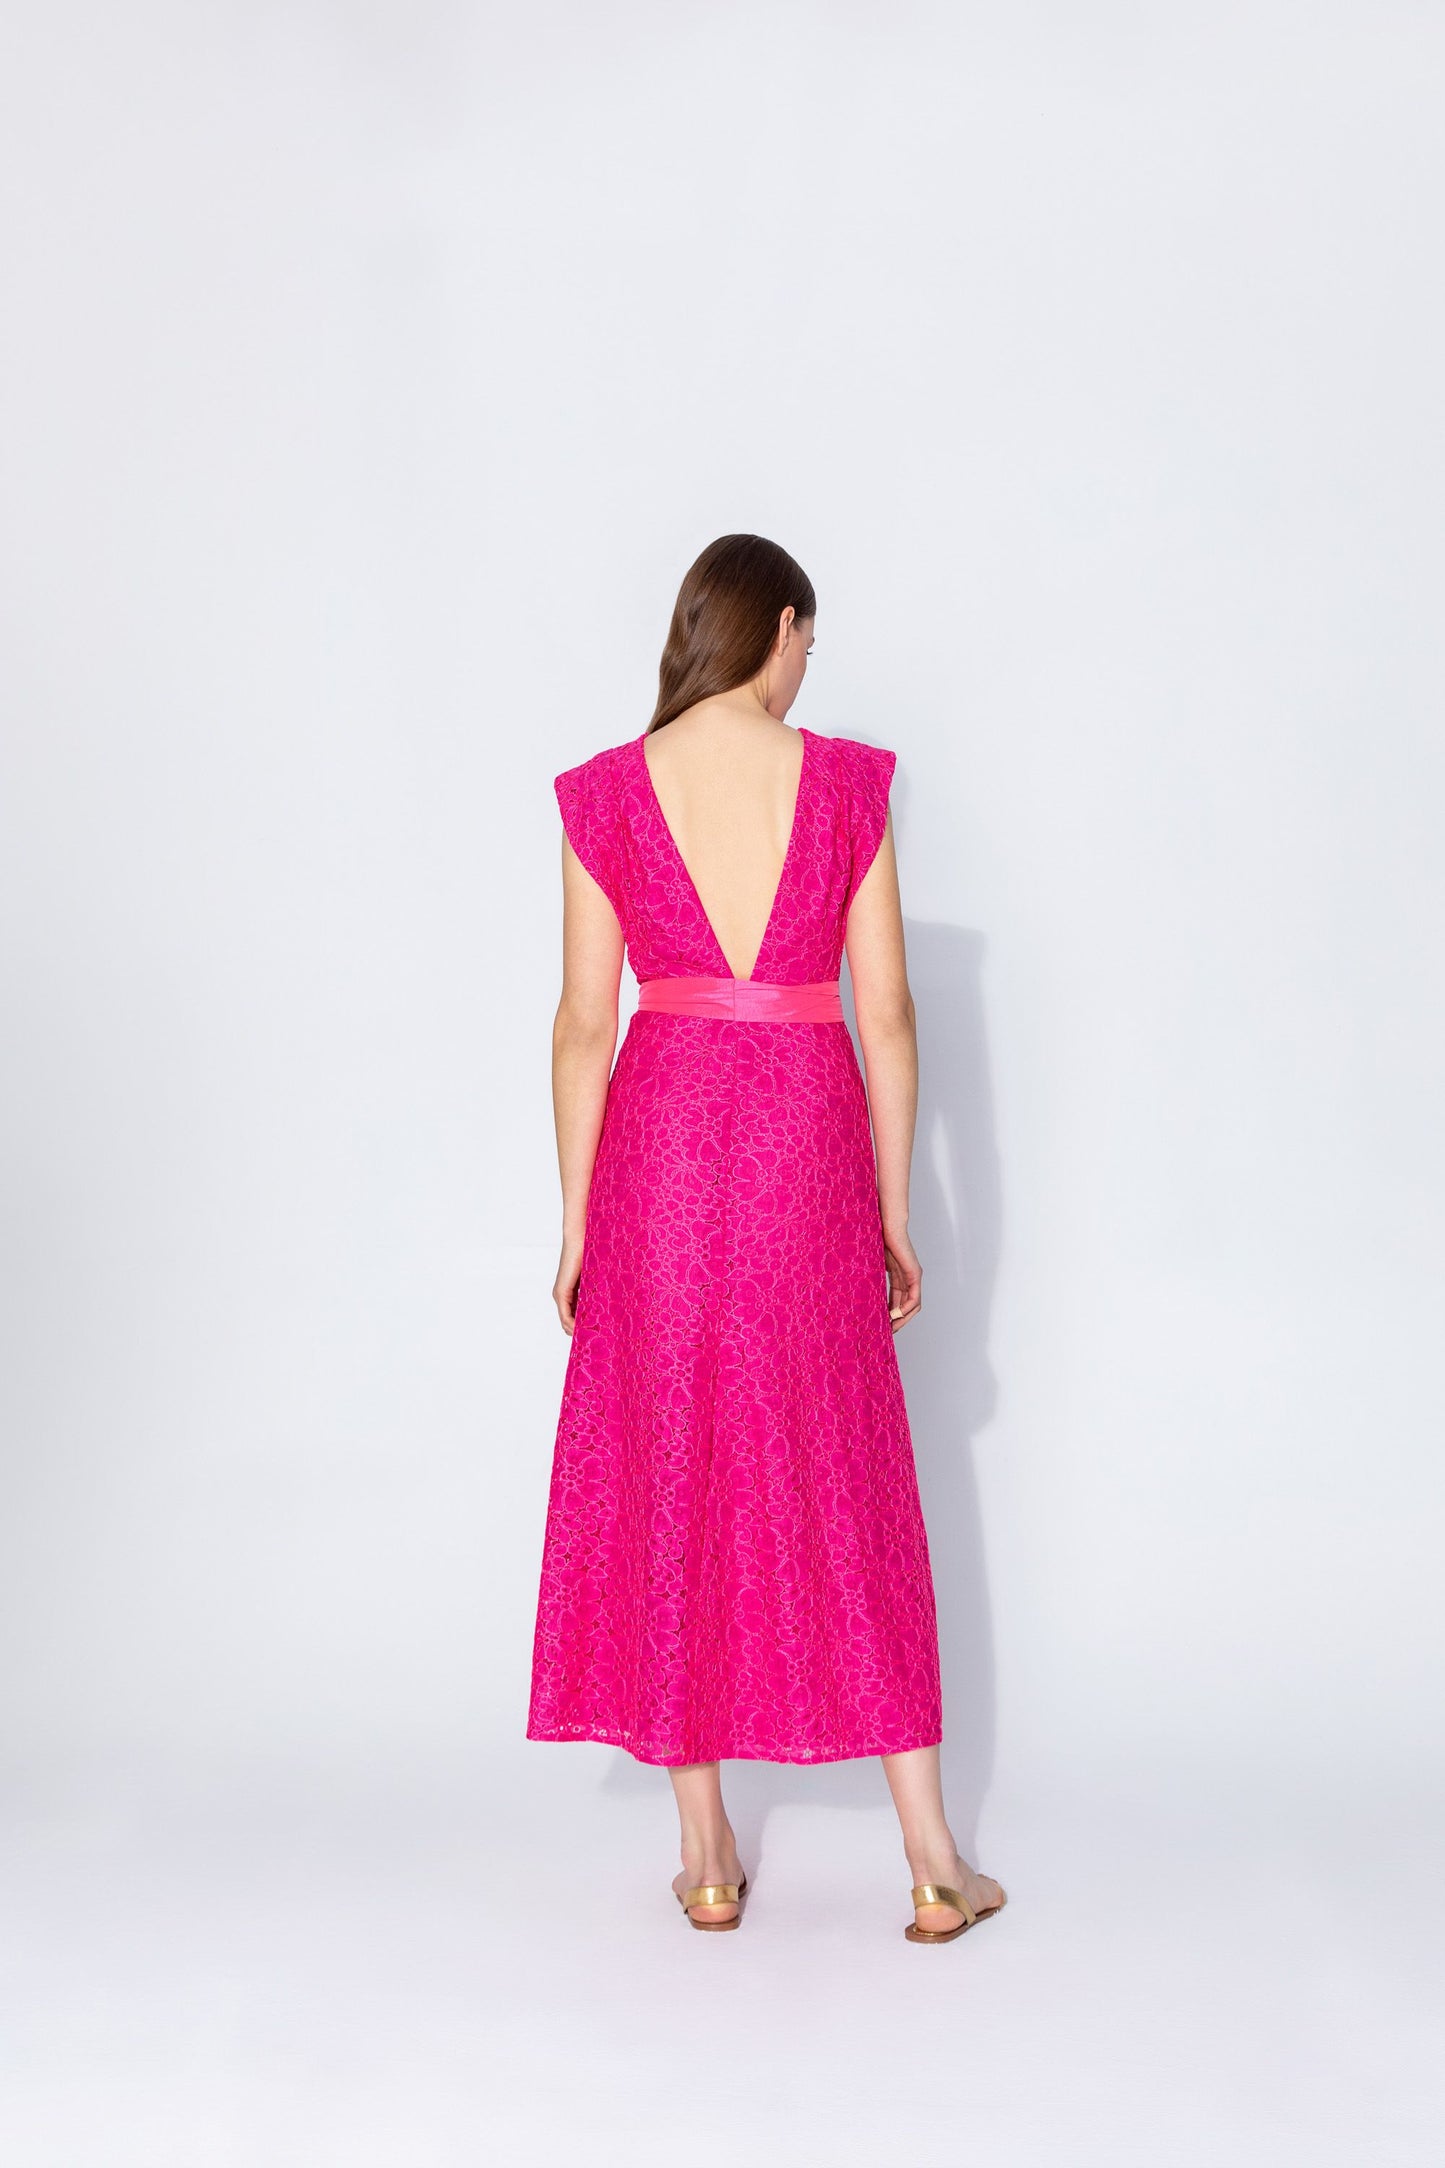 Cerise Pink Lace Fit and Flare Dress with Tie Belt